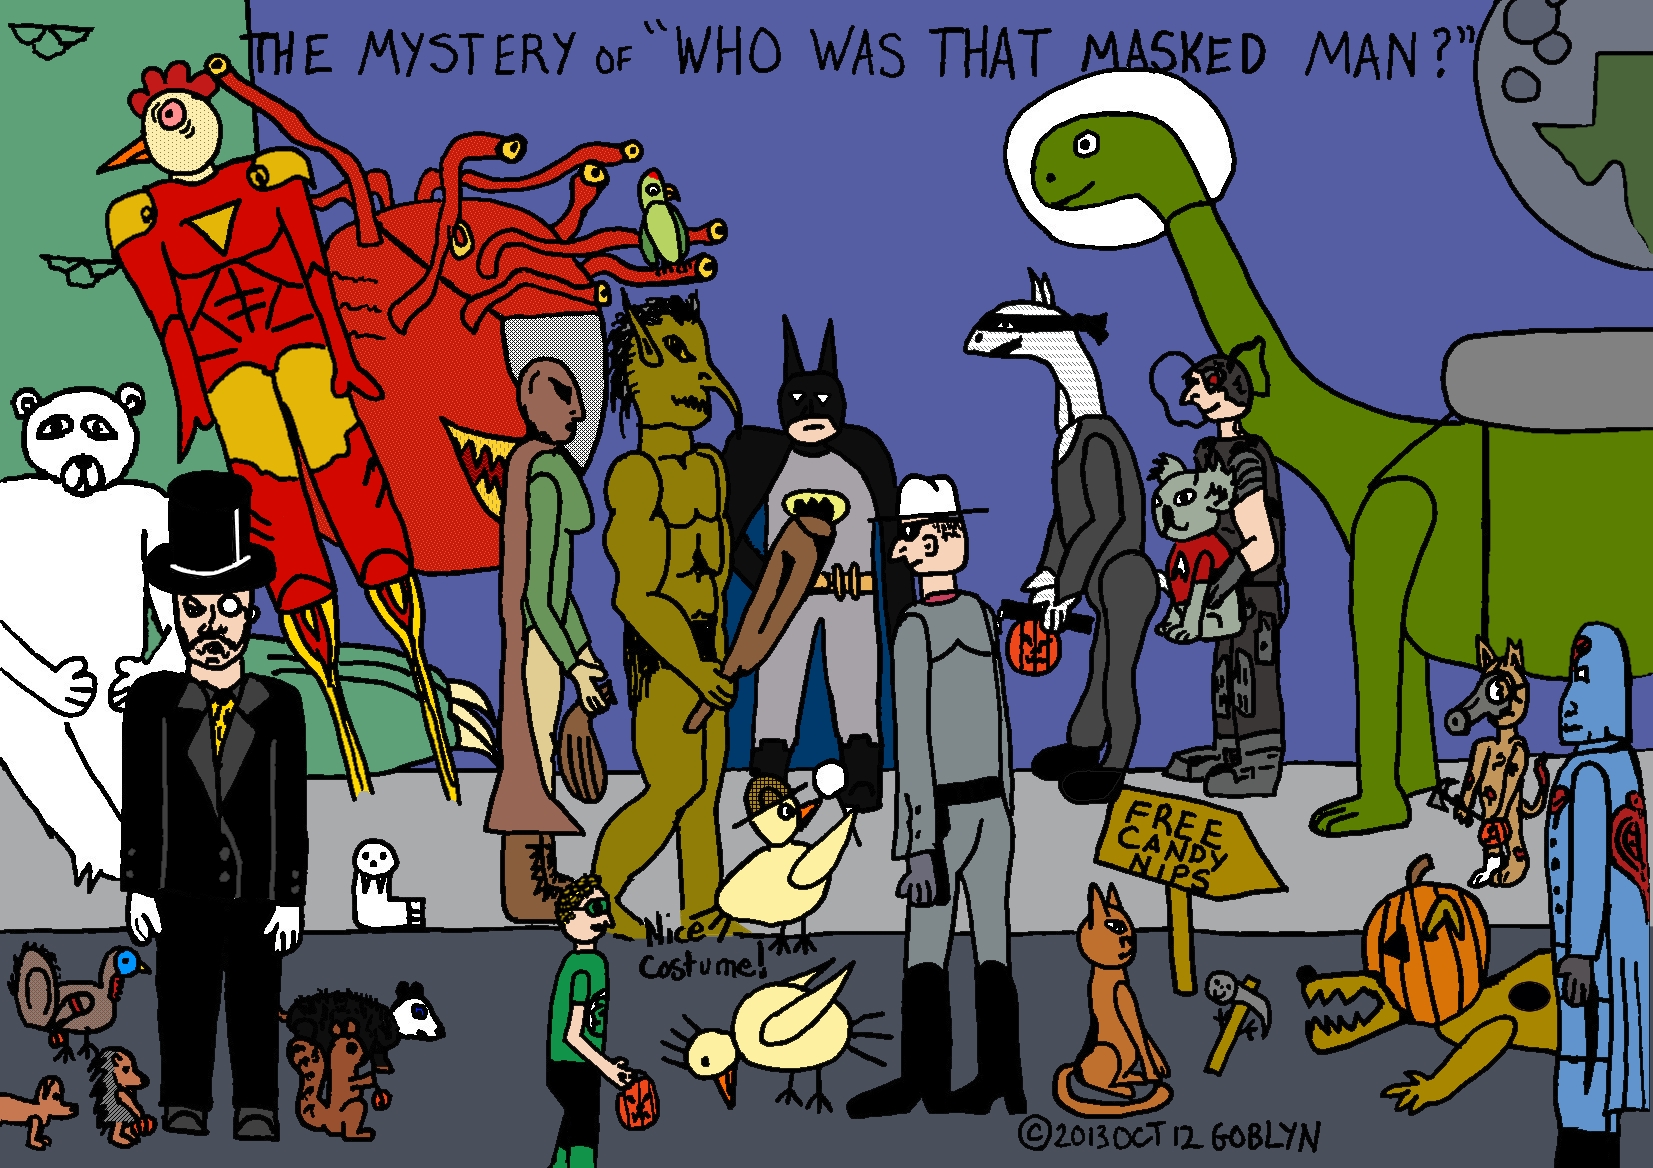 The Chicken Hounds in The Mystery of "Who was that Masked Man?"